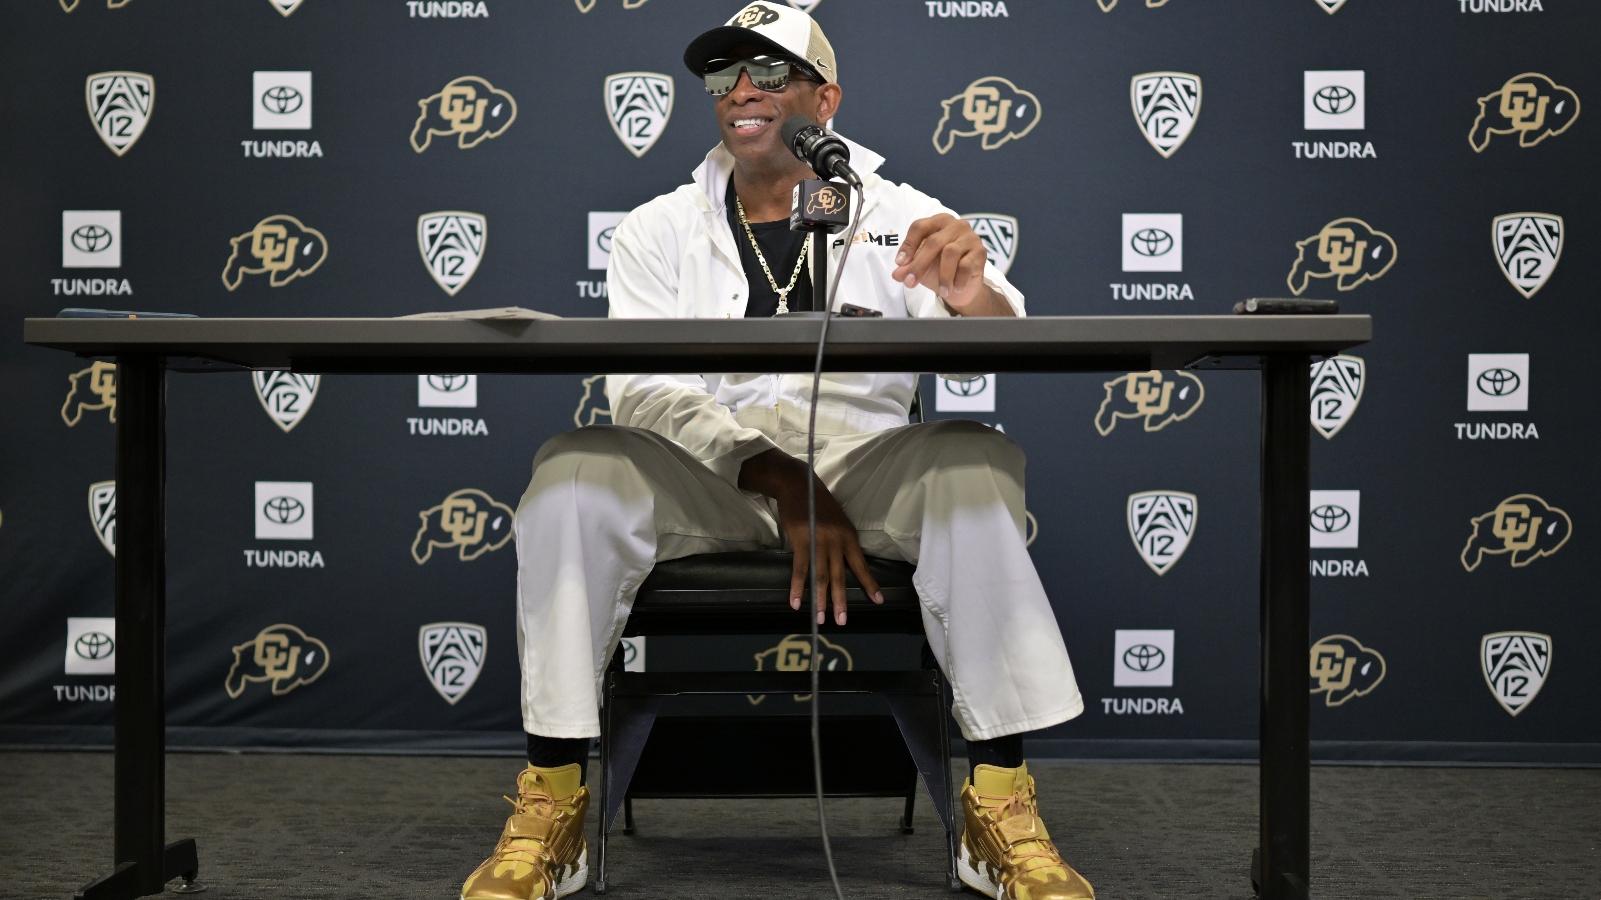 Deion Sanders doing a press conference